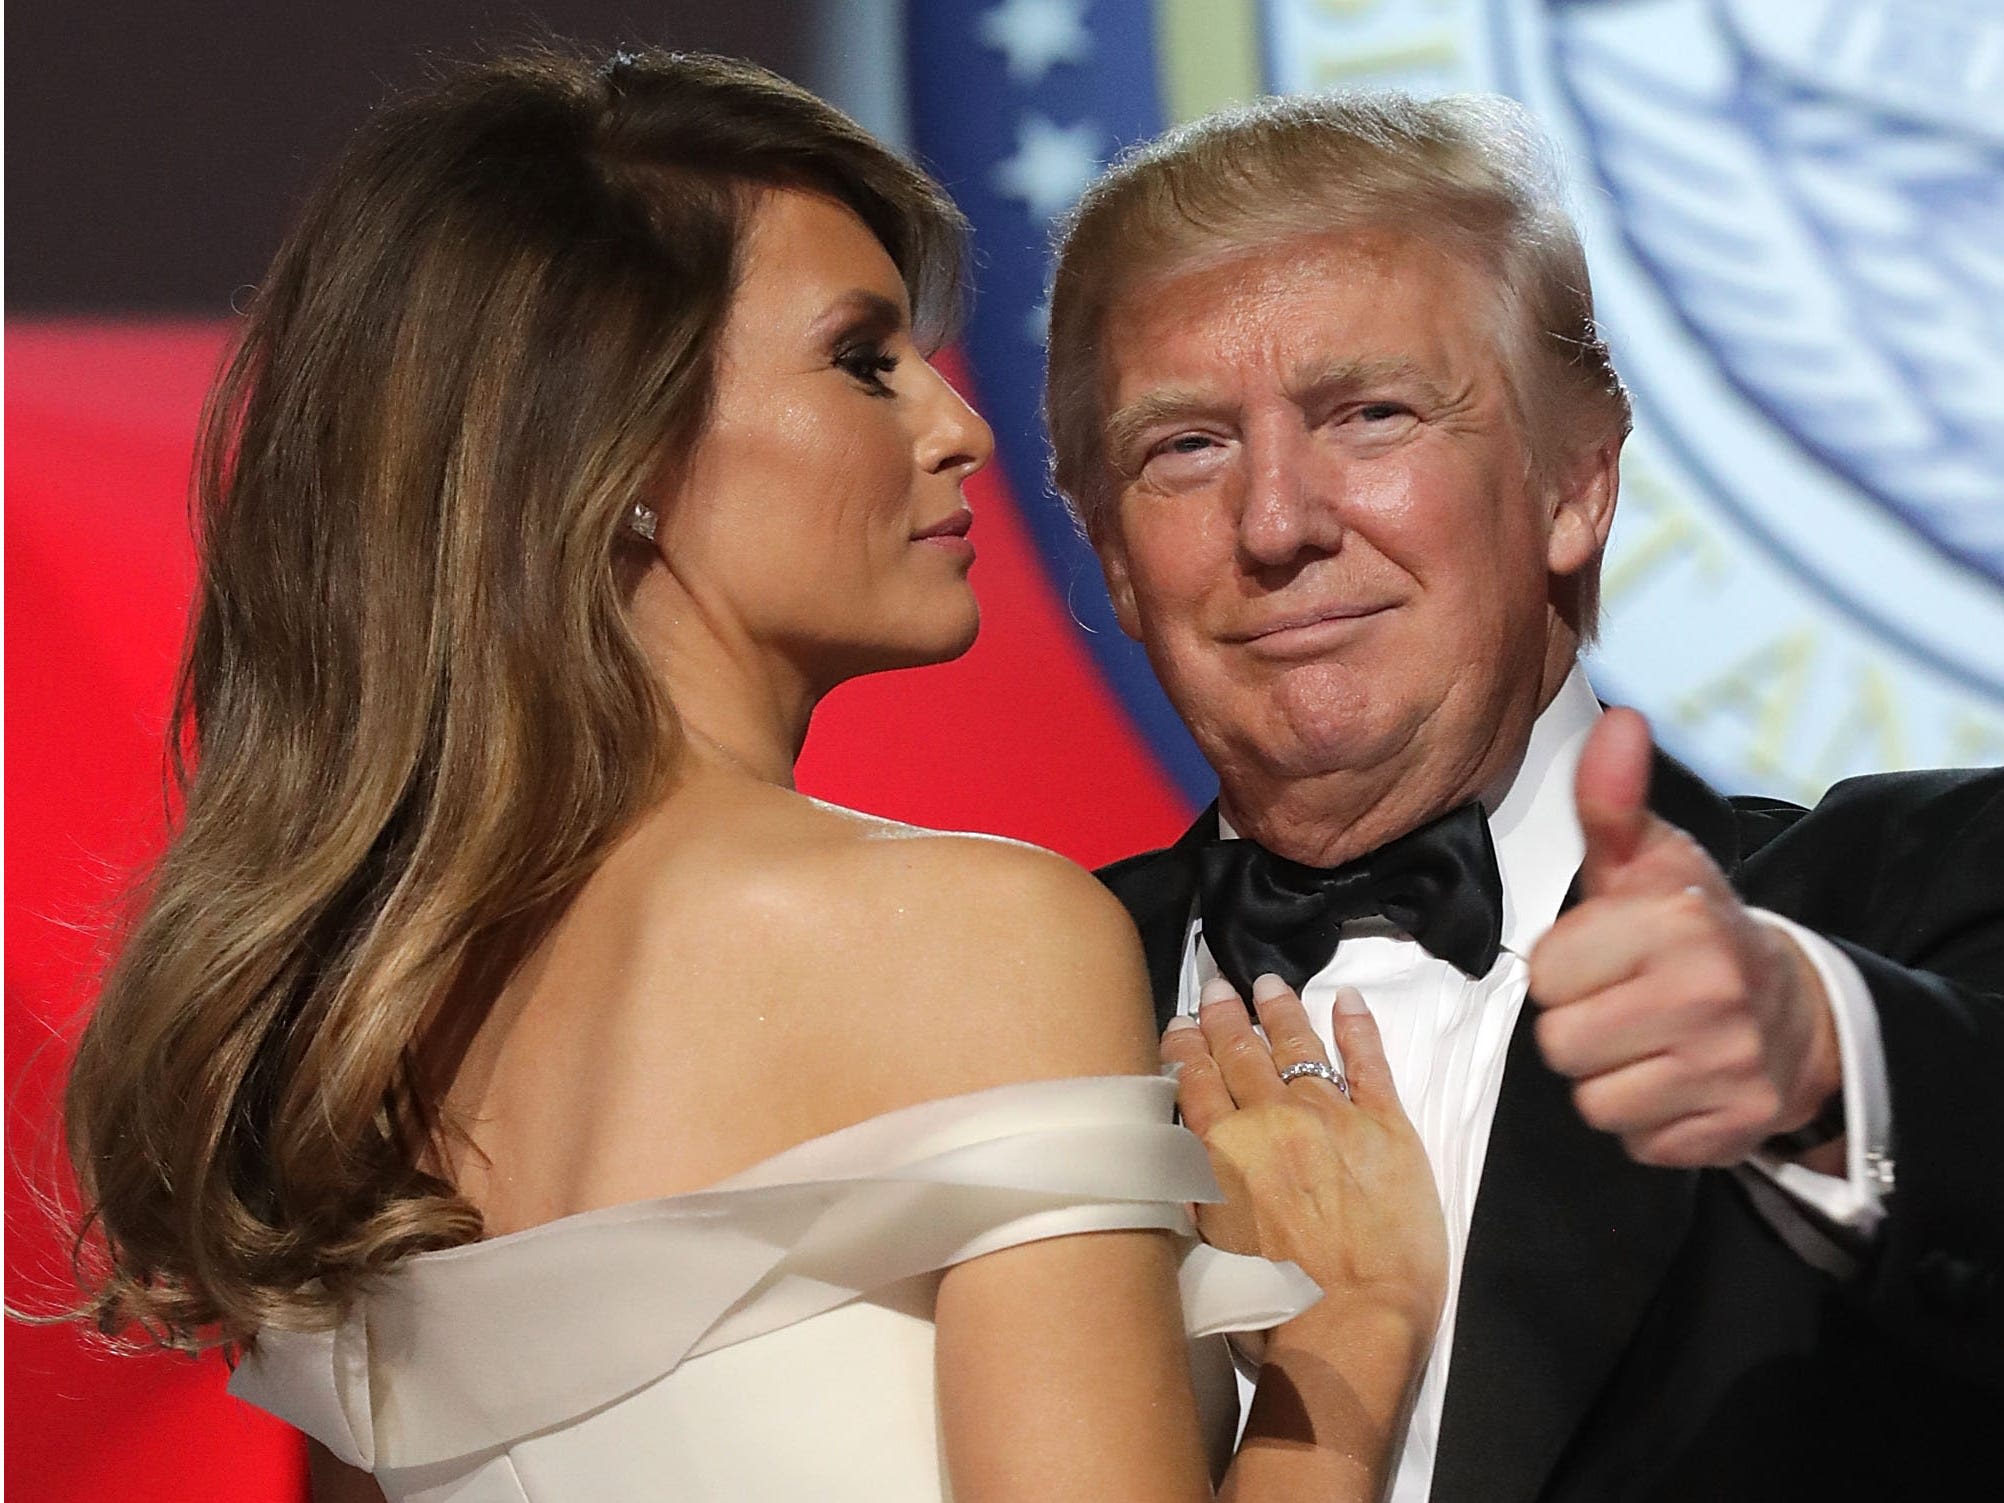 Donald and Melania Trump are keeping a united front through the former president's criminal trial. Here's a timeline of their 26-year relationship.